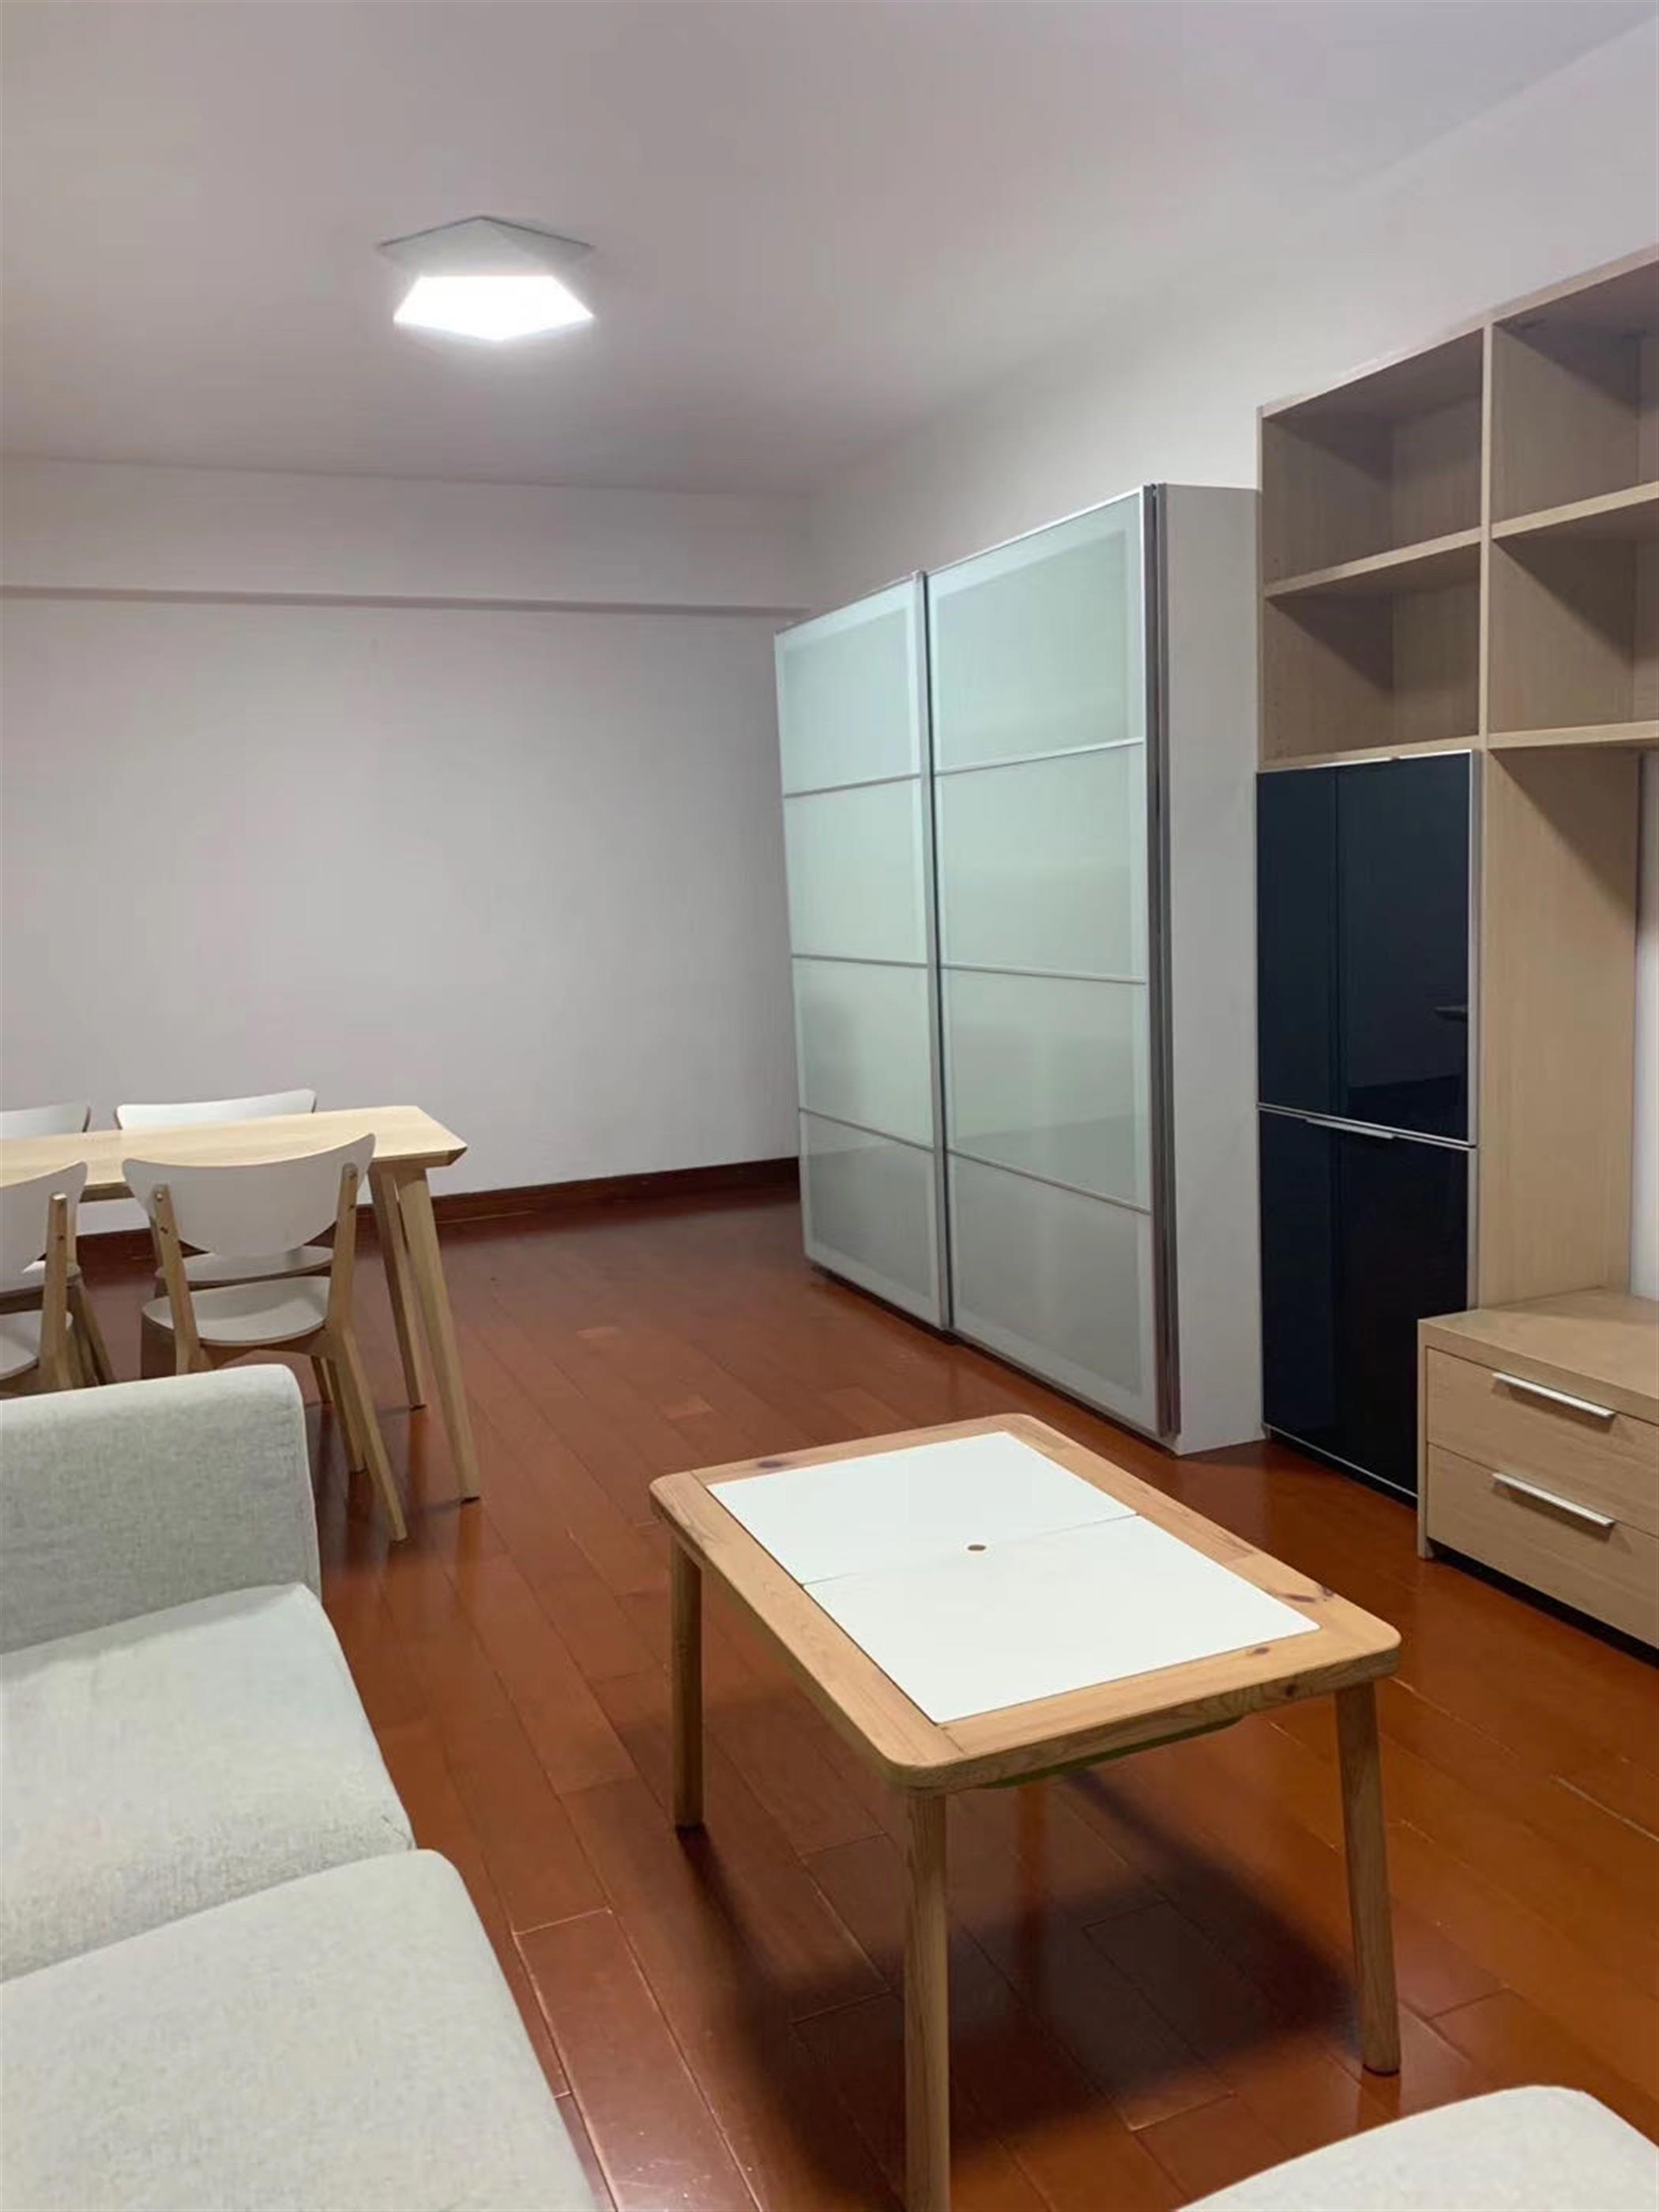 storage space Affordable 2BR Suzhou Creek Apartment Nr LN 1/12/13 for Rent in Shanghai